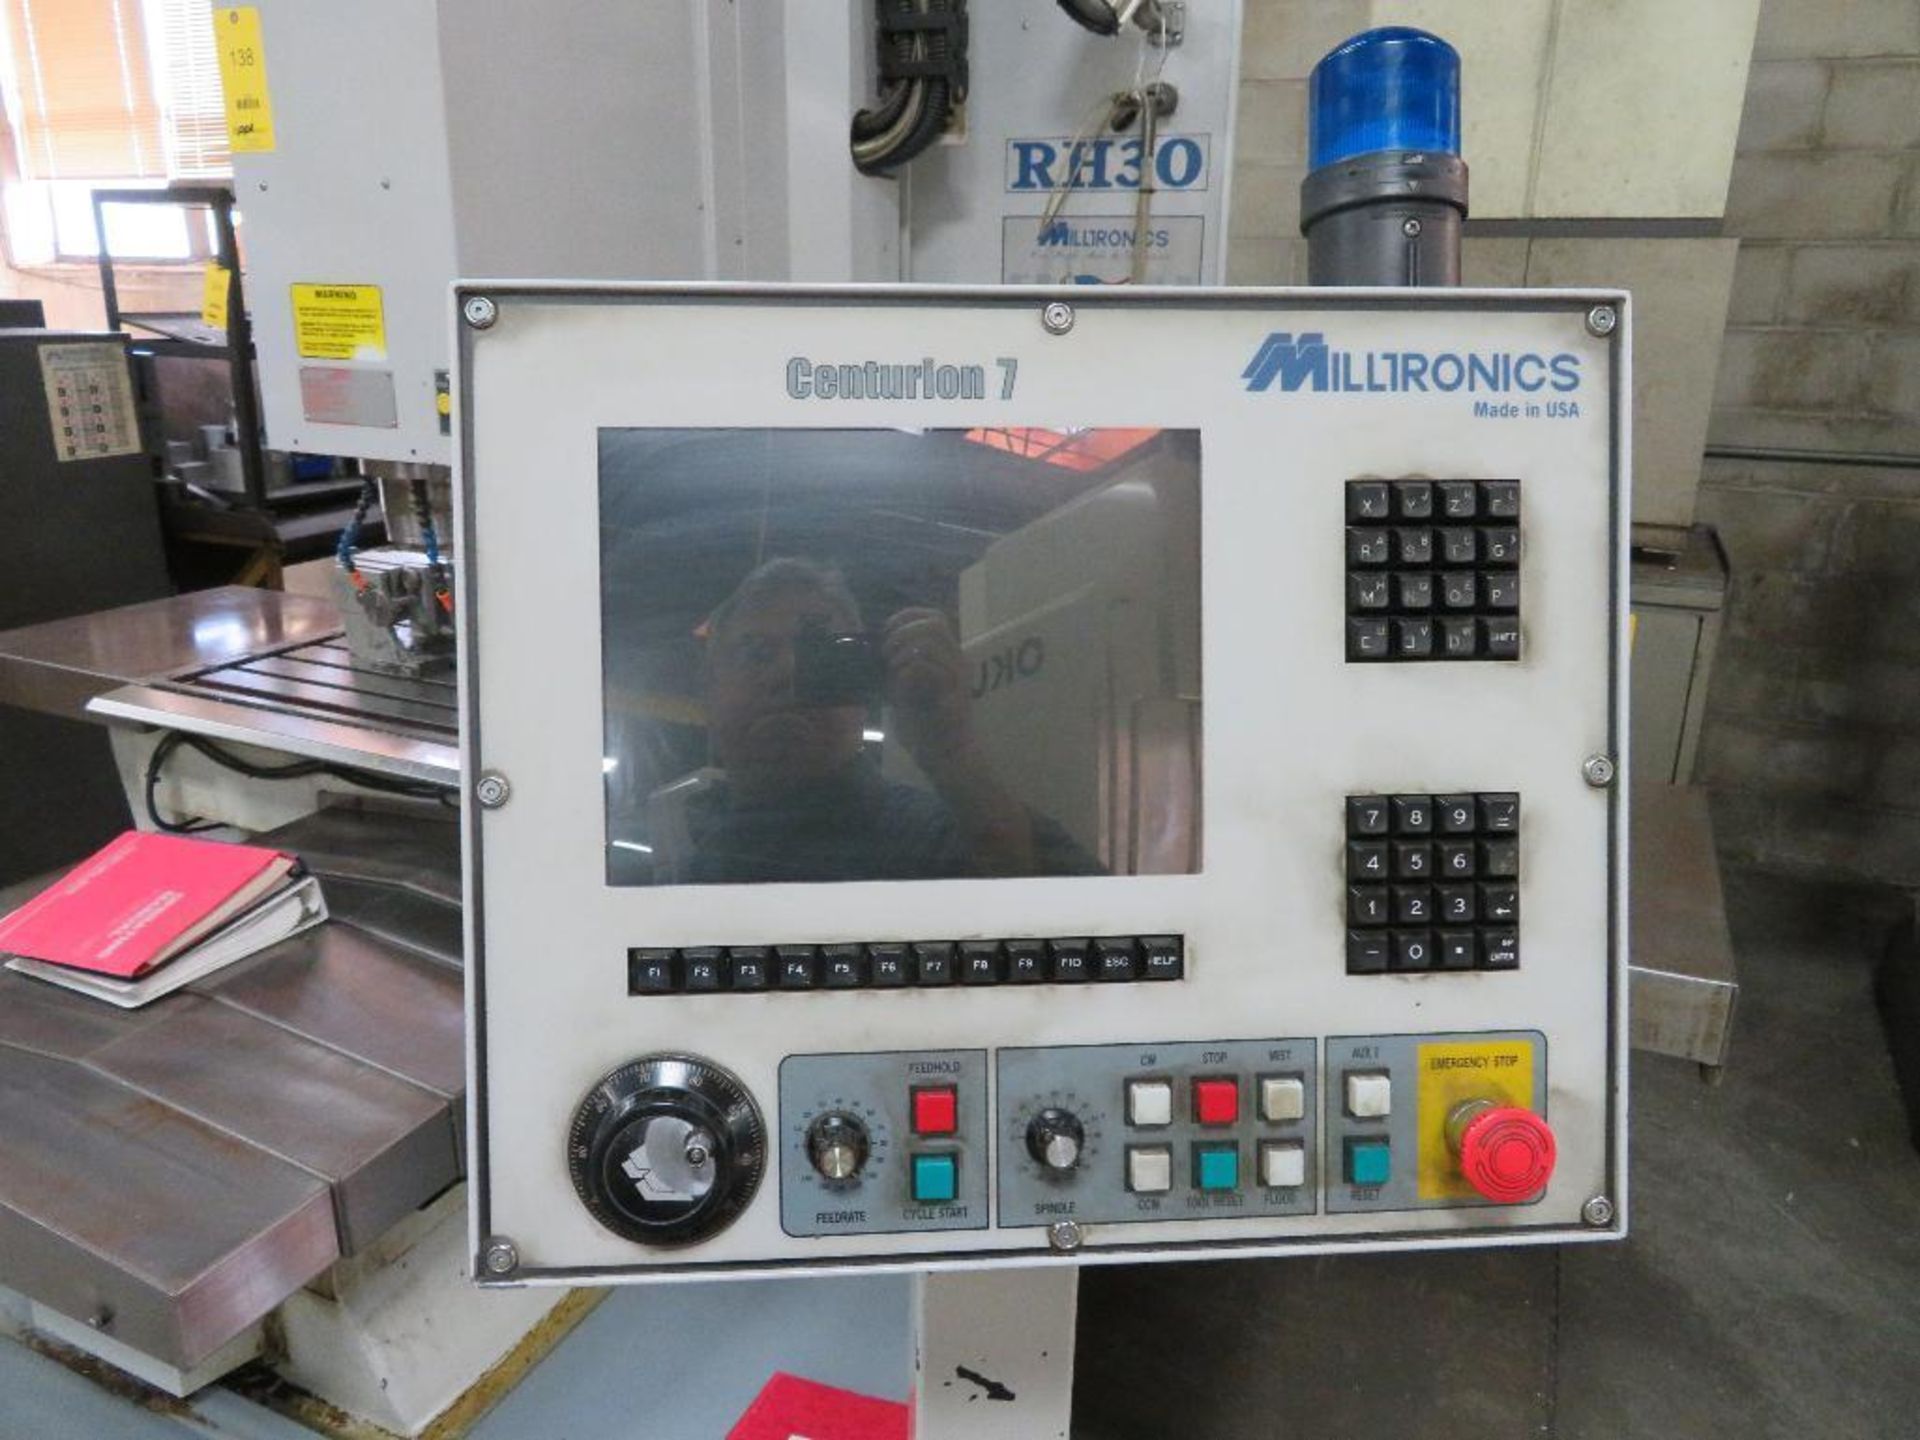 Milltronics 4-Axis CNC Vertical Mill Model RH-30, Series G, S/N 9080(0617), 24 in. x 66 in. Work - Image 5 of 6